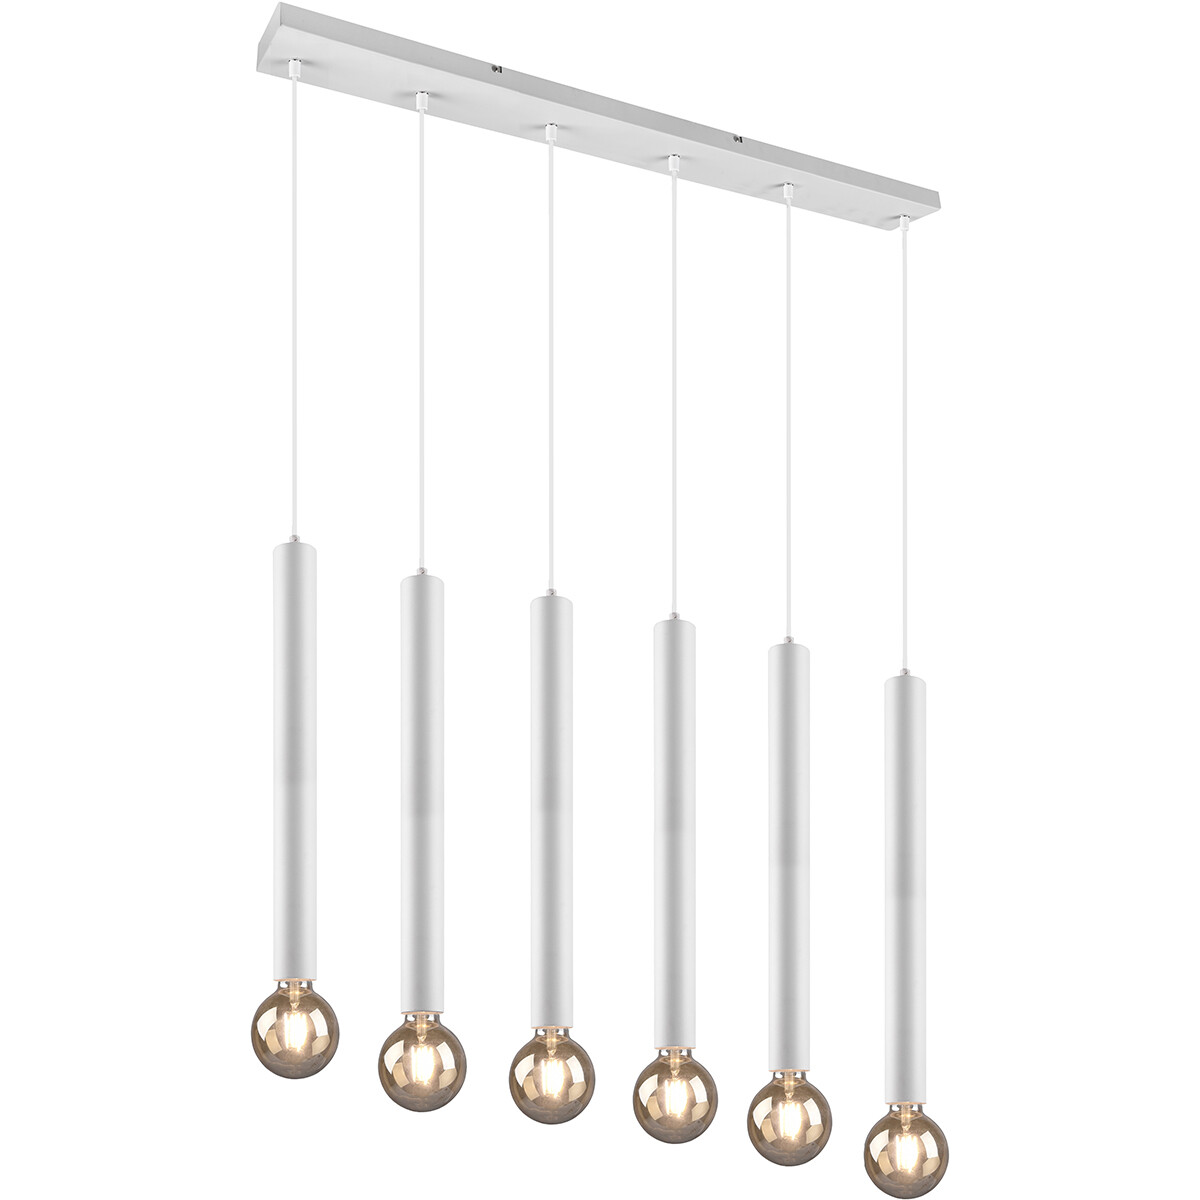 LED Hanglamp - Hangverlichting - Trion Claro - E27 Fitting - 6-lichts - Rond - Mat Wit - Aluminium product afbeelding